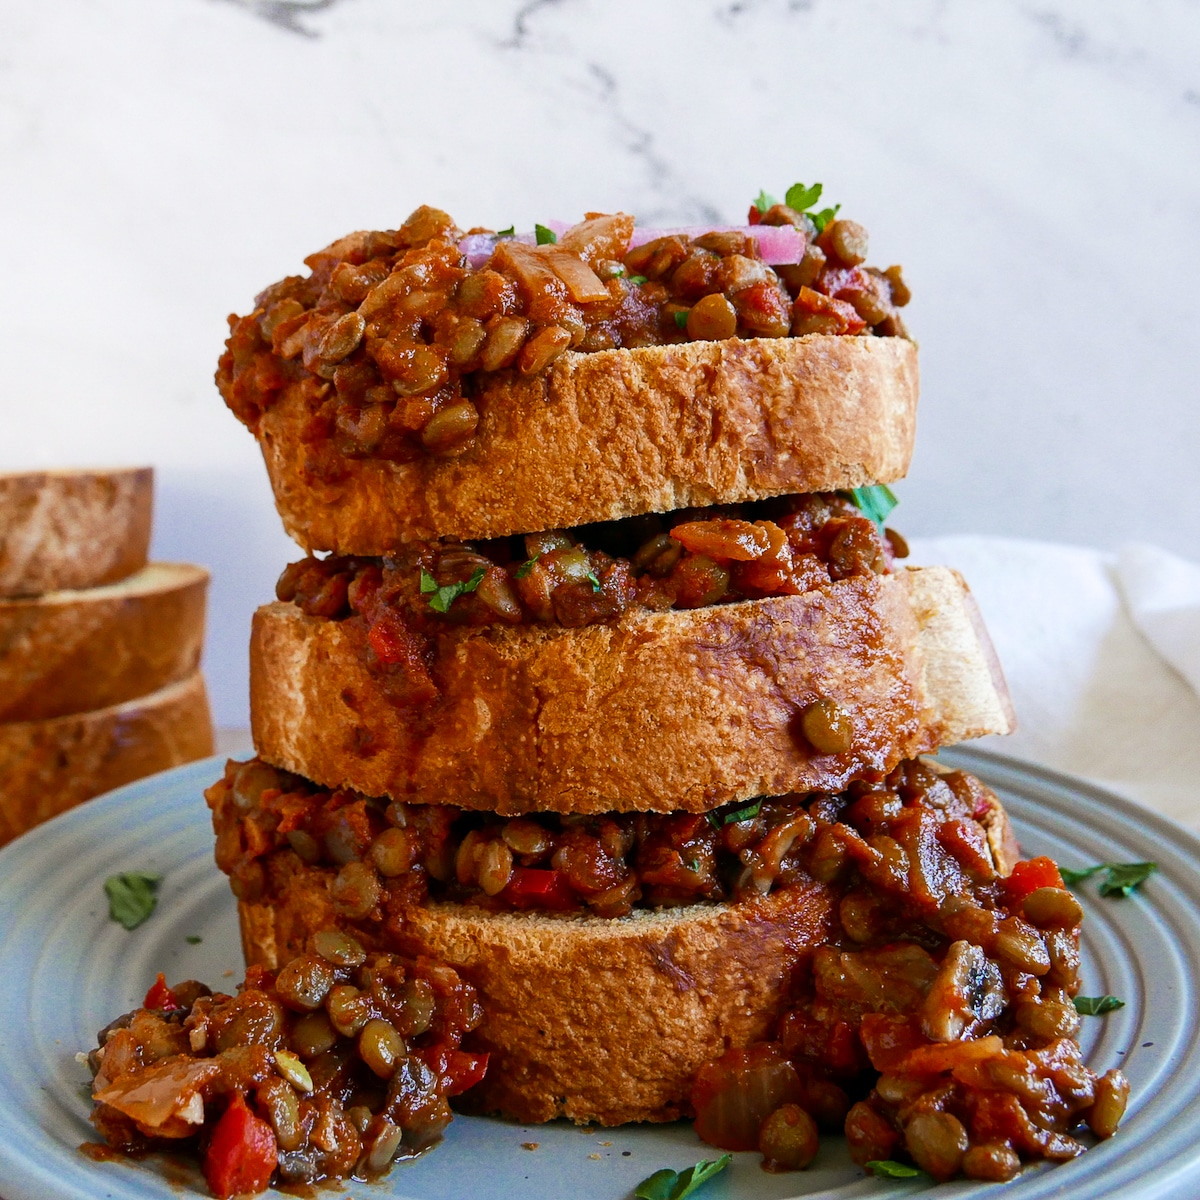 stack of 3 texas toast sloppy joes on a gray plate.